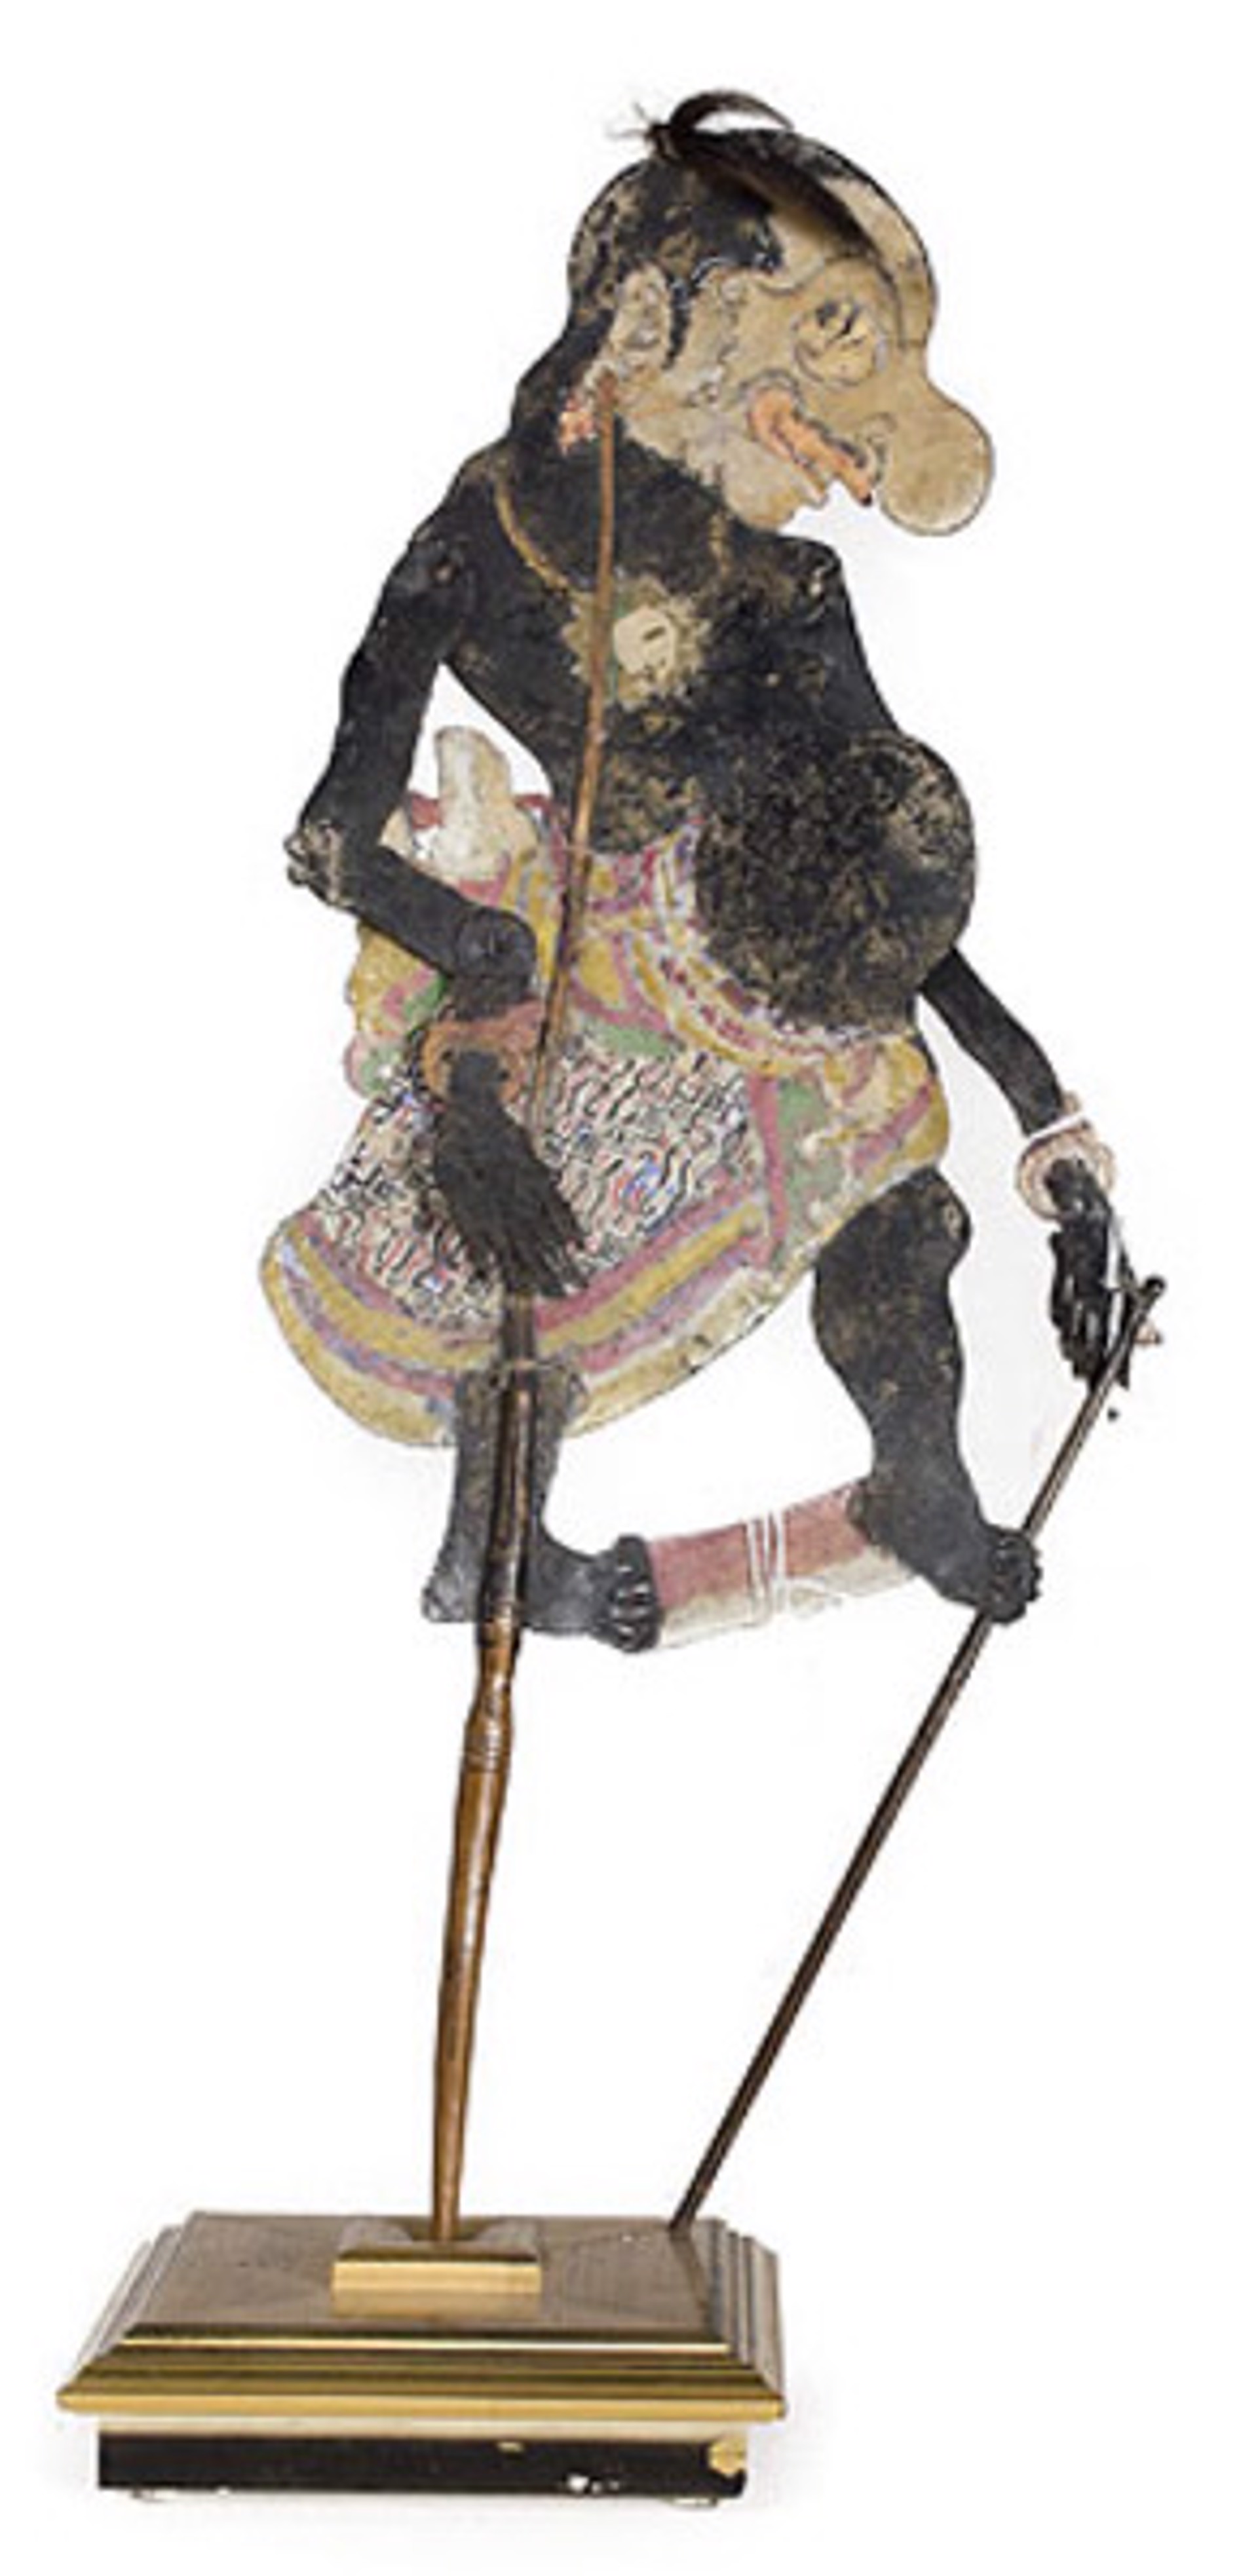 Balinese Shadow Puppet by Indonesian